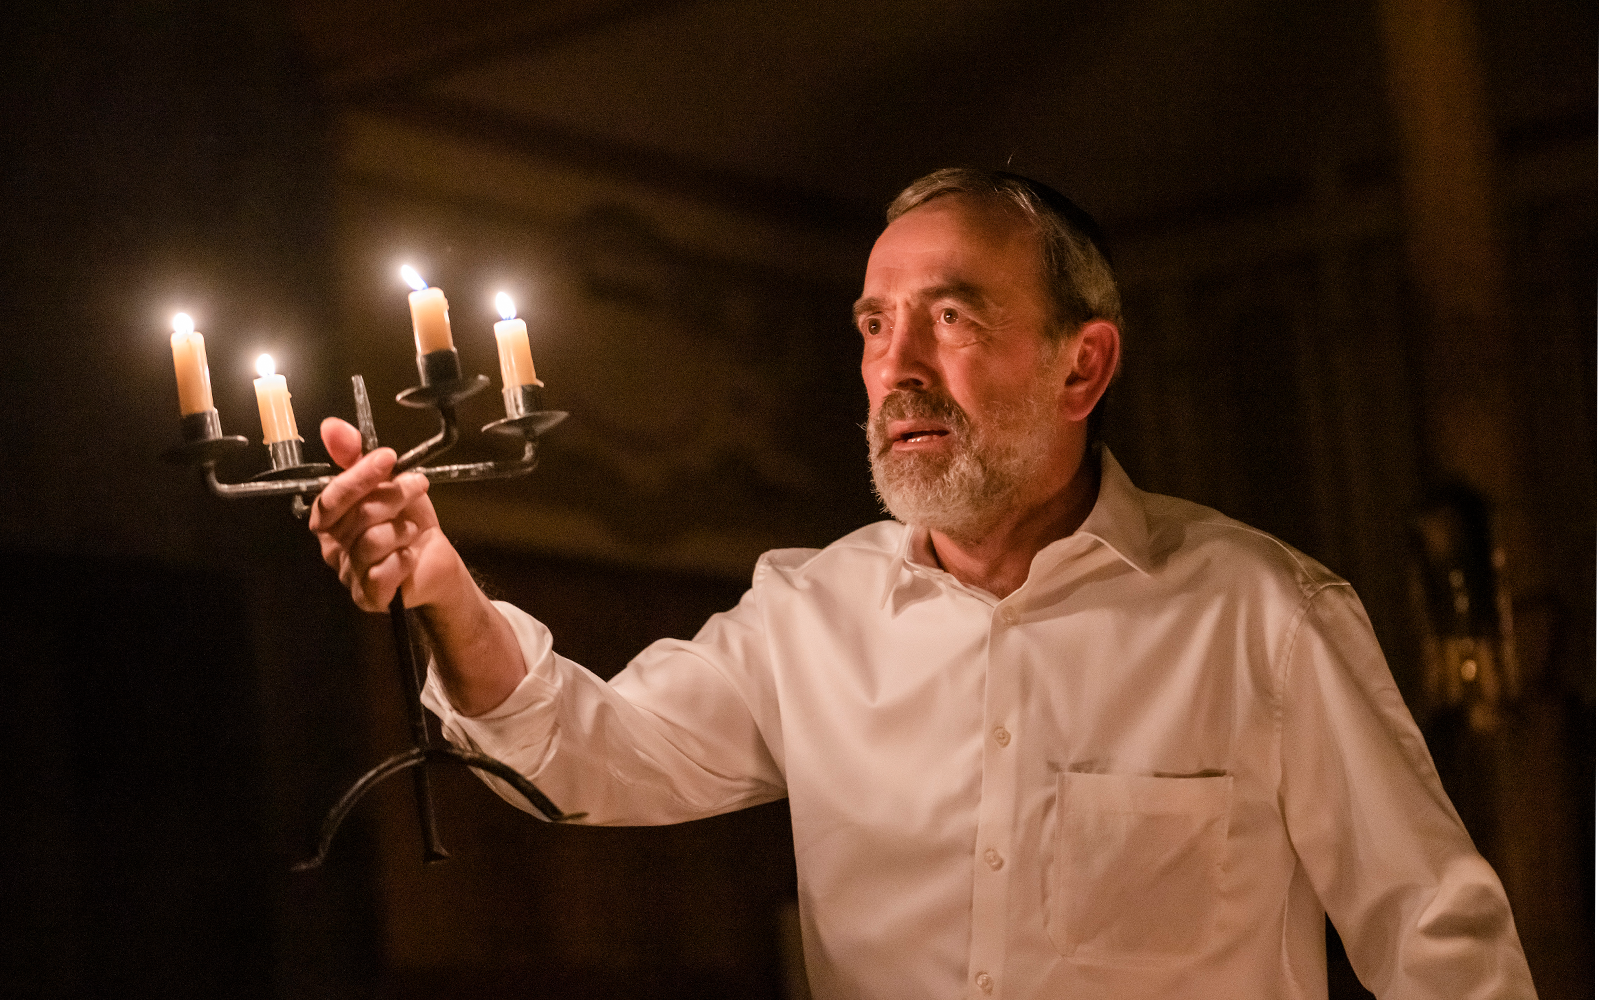 A man holding up candles